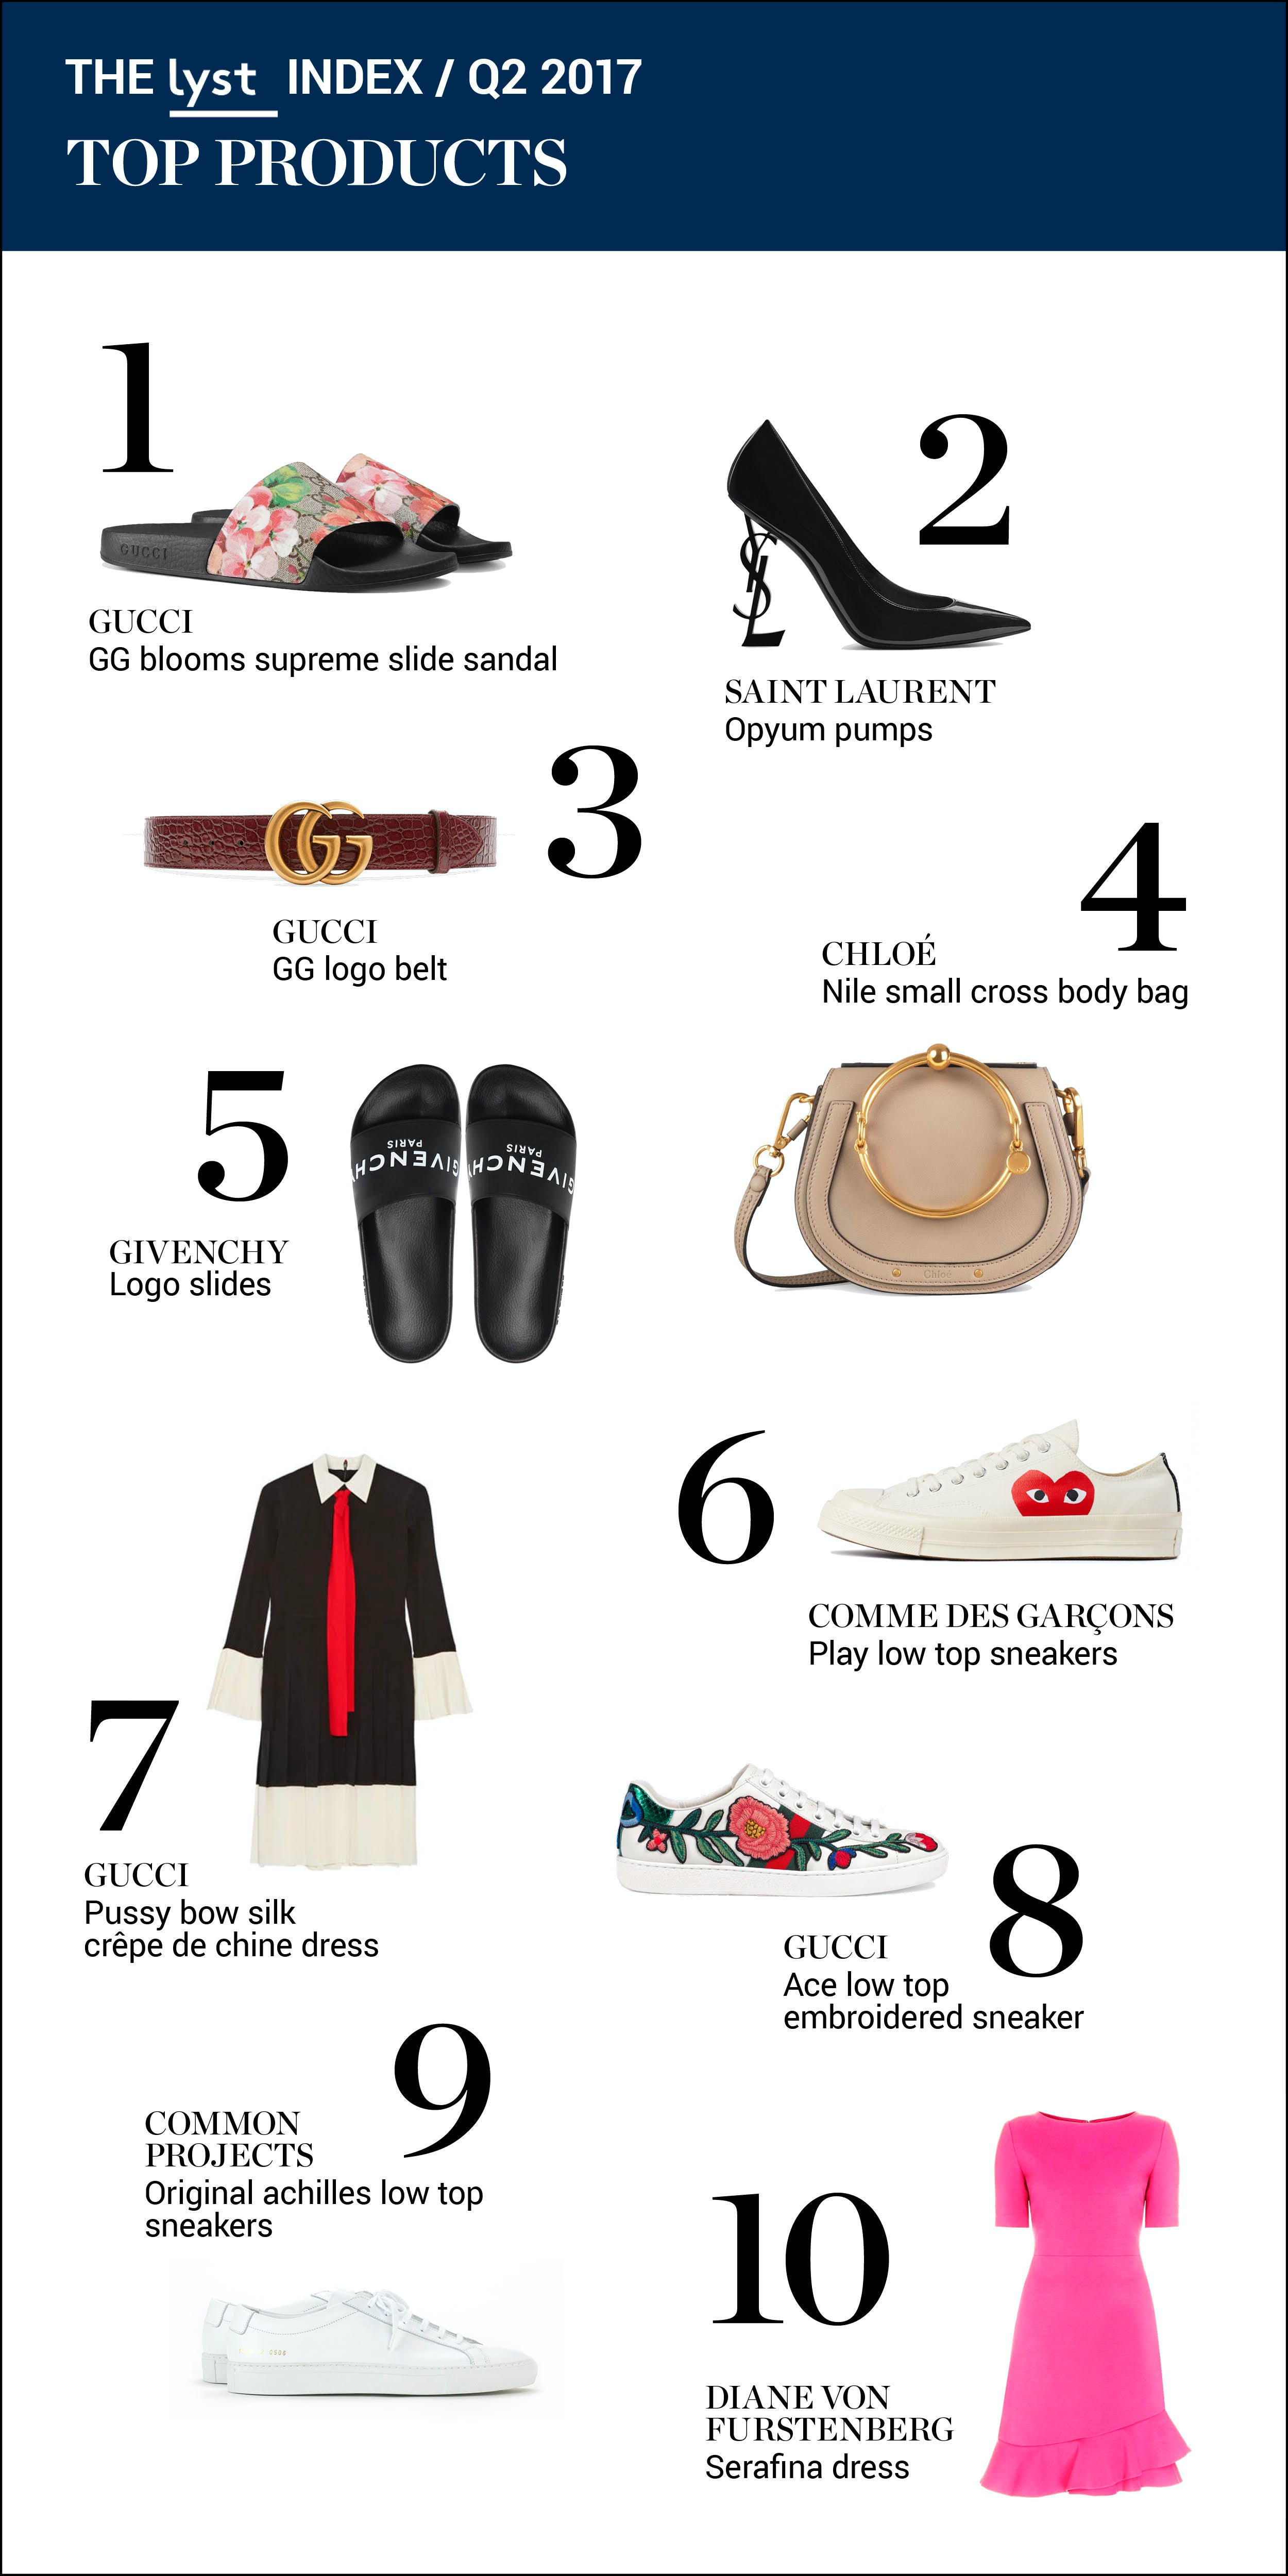 Gucci's strategy: What does it take to be #1 hottest brand?